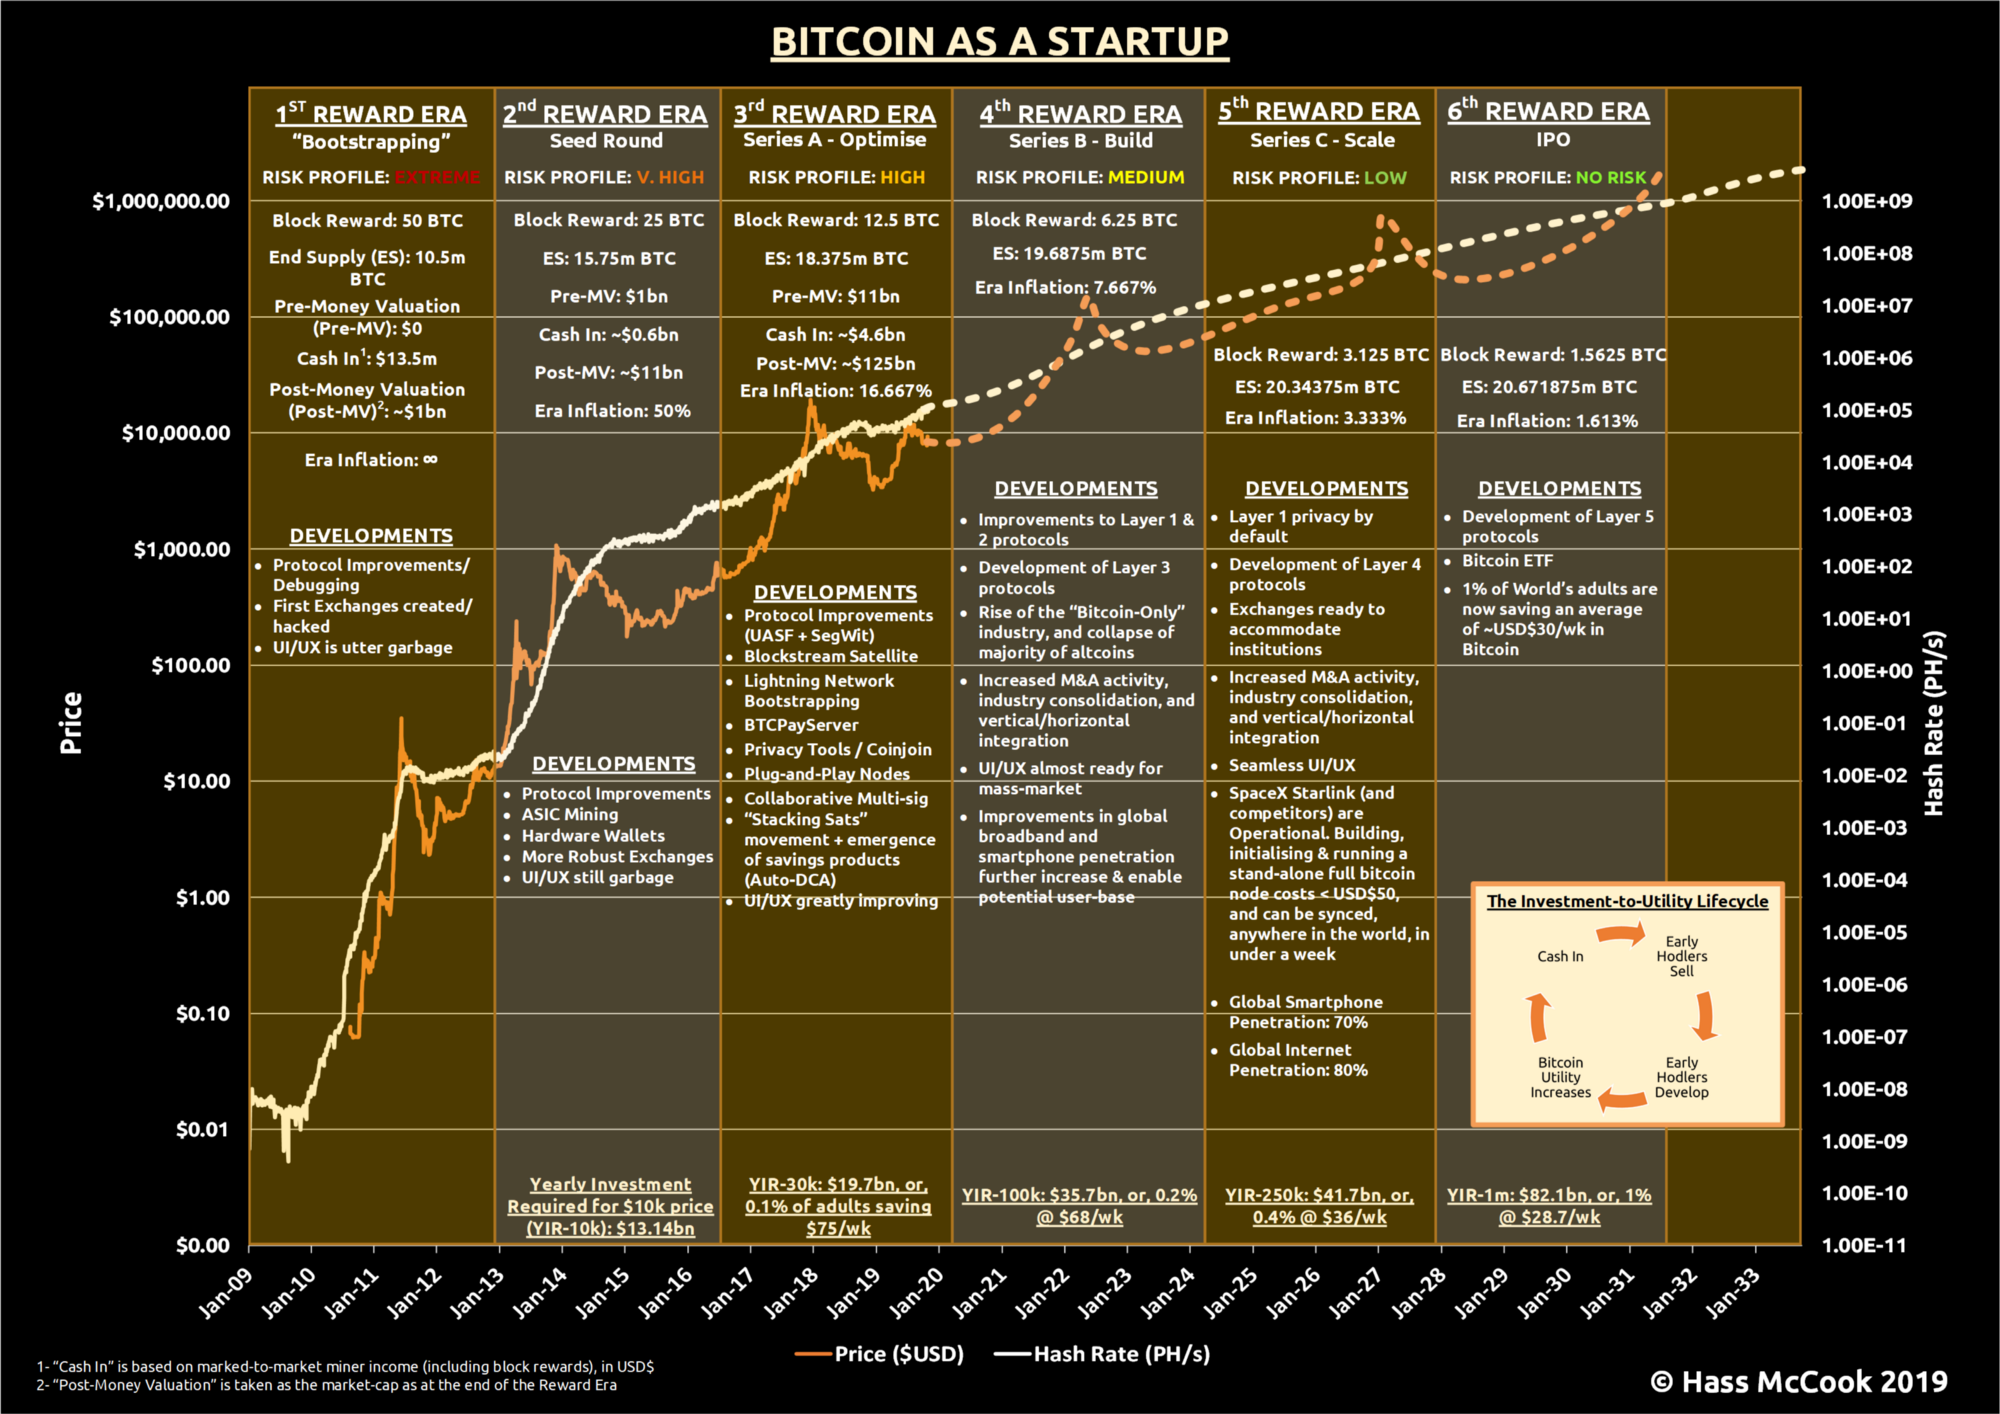 How_to_Value_Bitcoin_Bitcoin-as-a-Startup.png